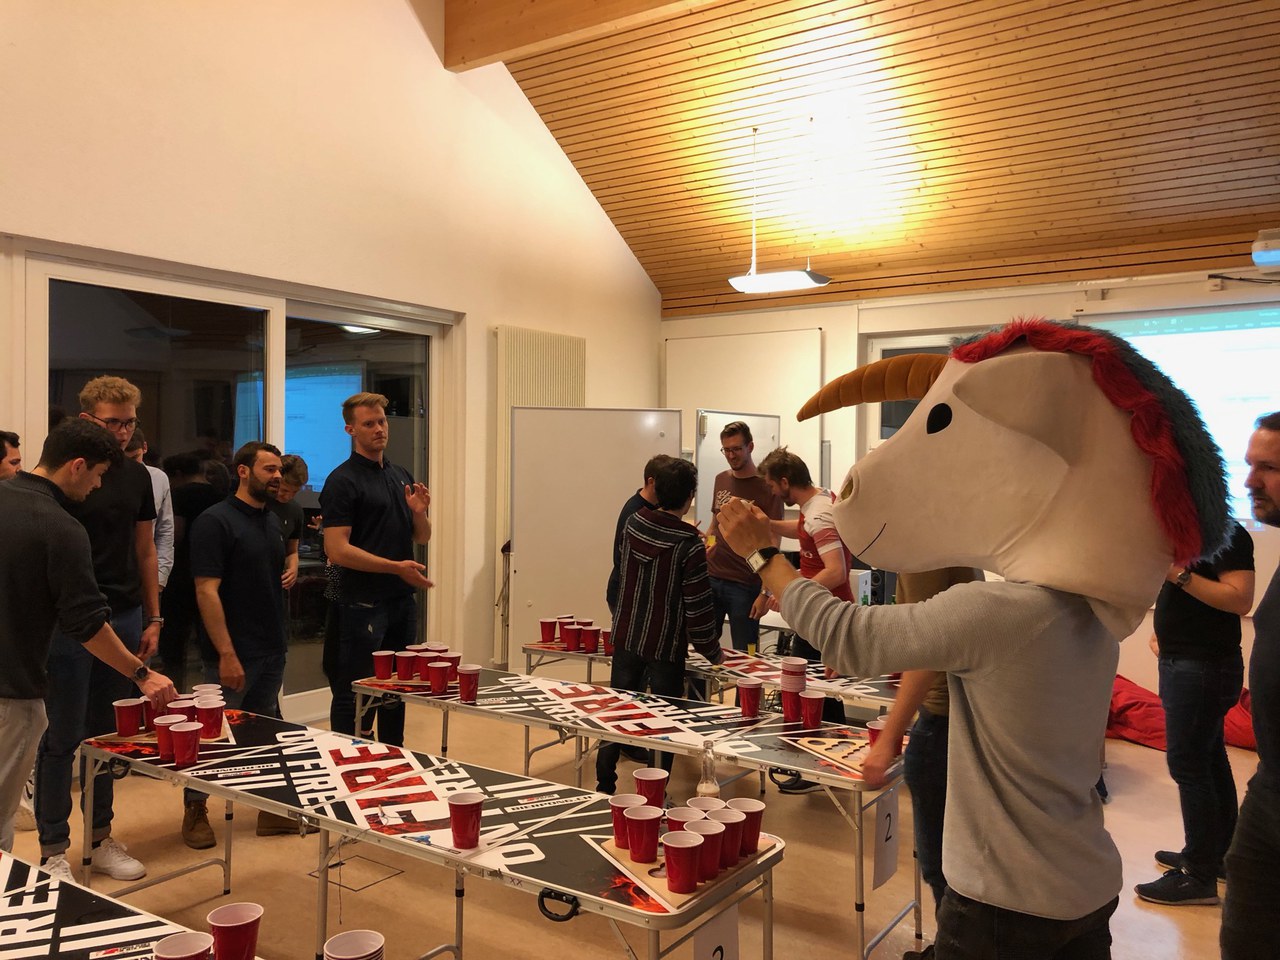 Blog_best-places_leisure-time_beer-pong